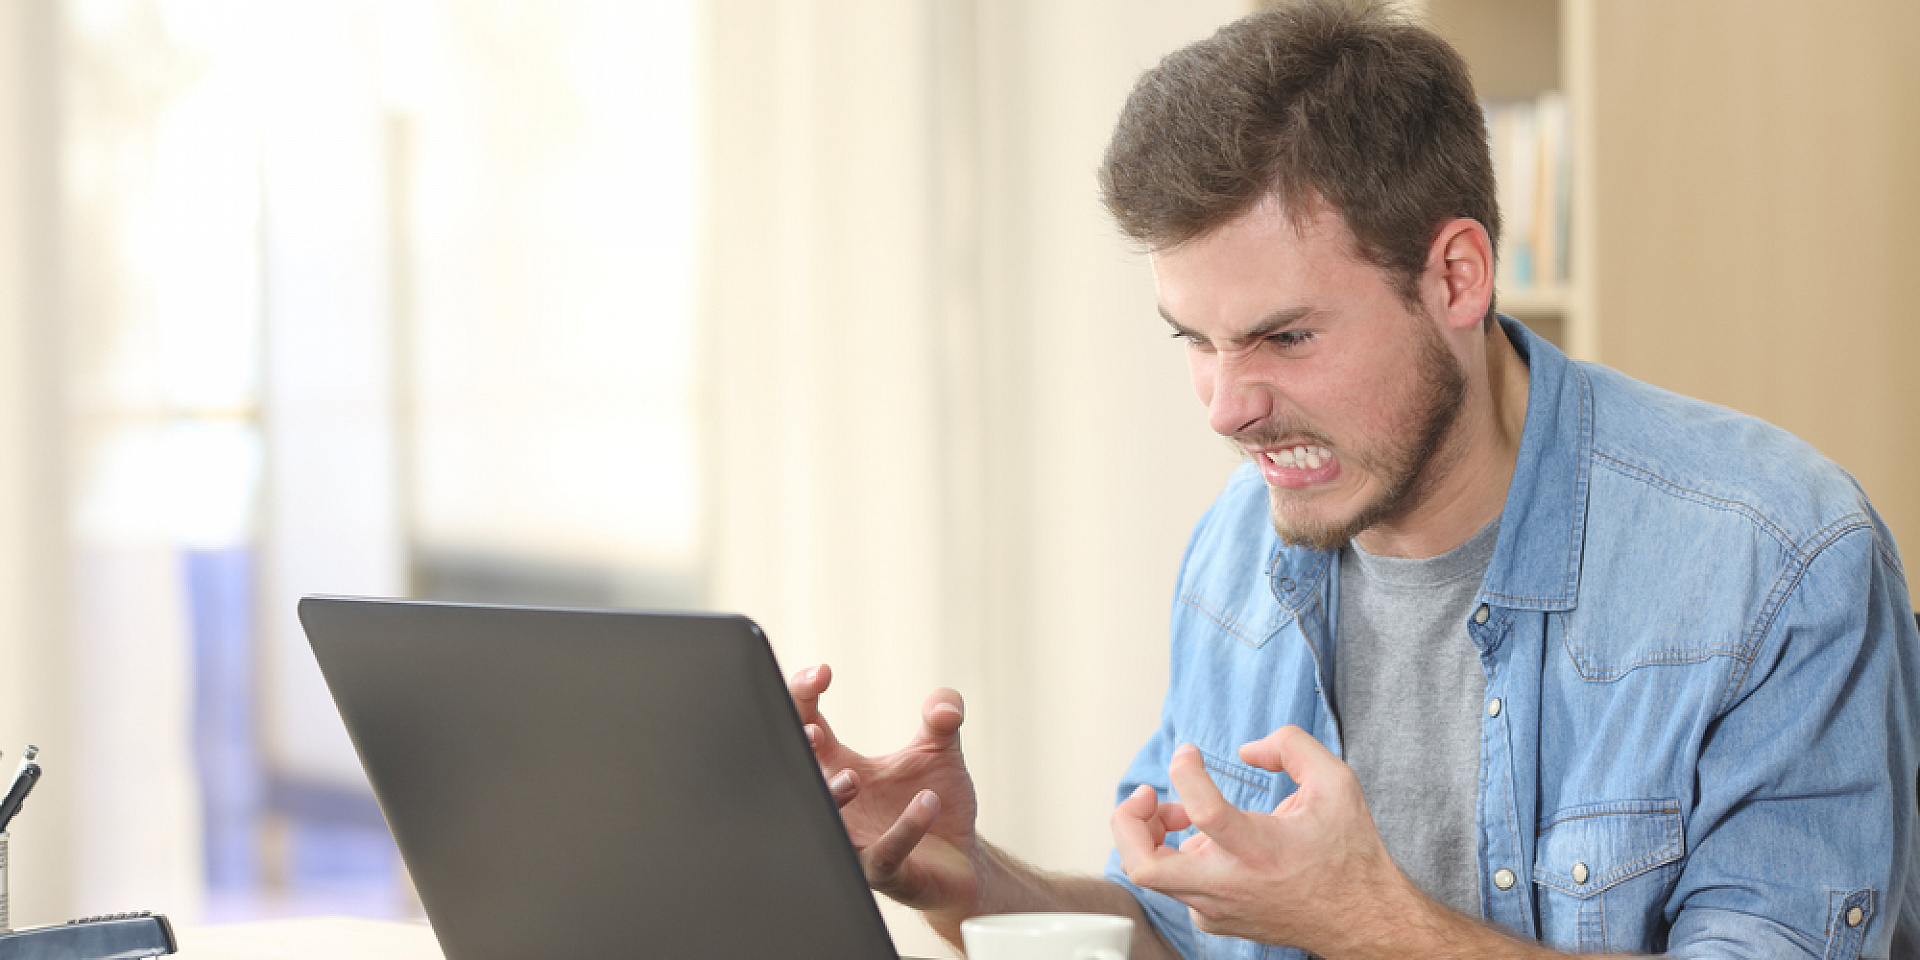 Frustrated man in front of his laptop.